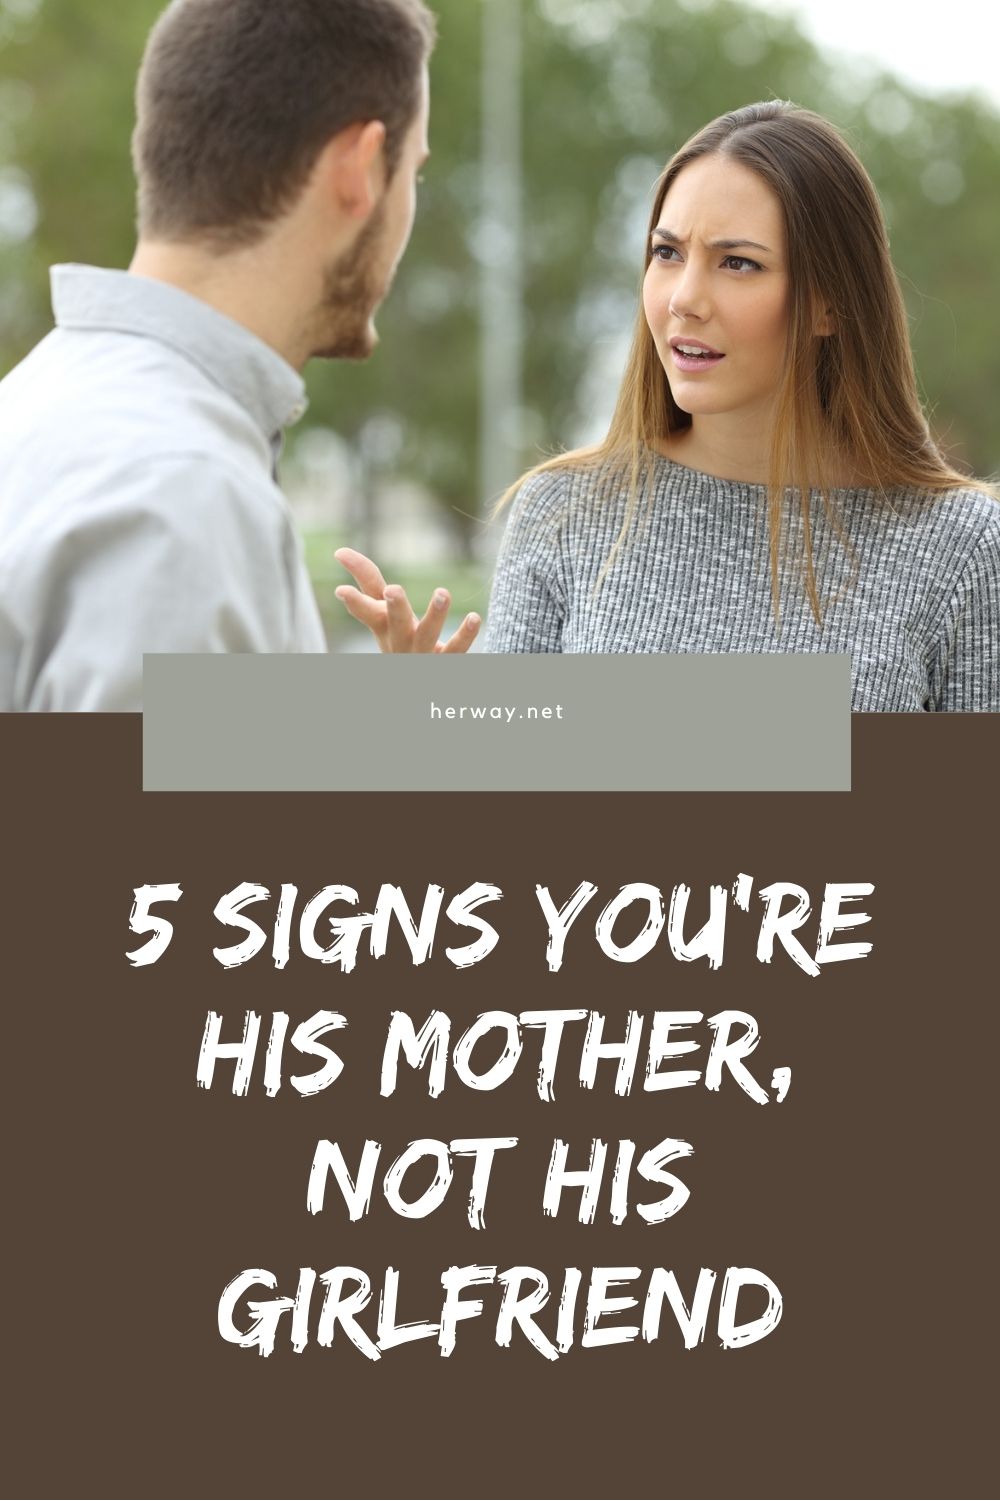 5 Signs You're His Mother, Not His Girlfriend